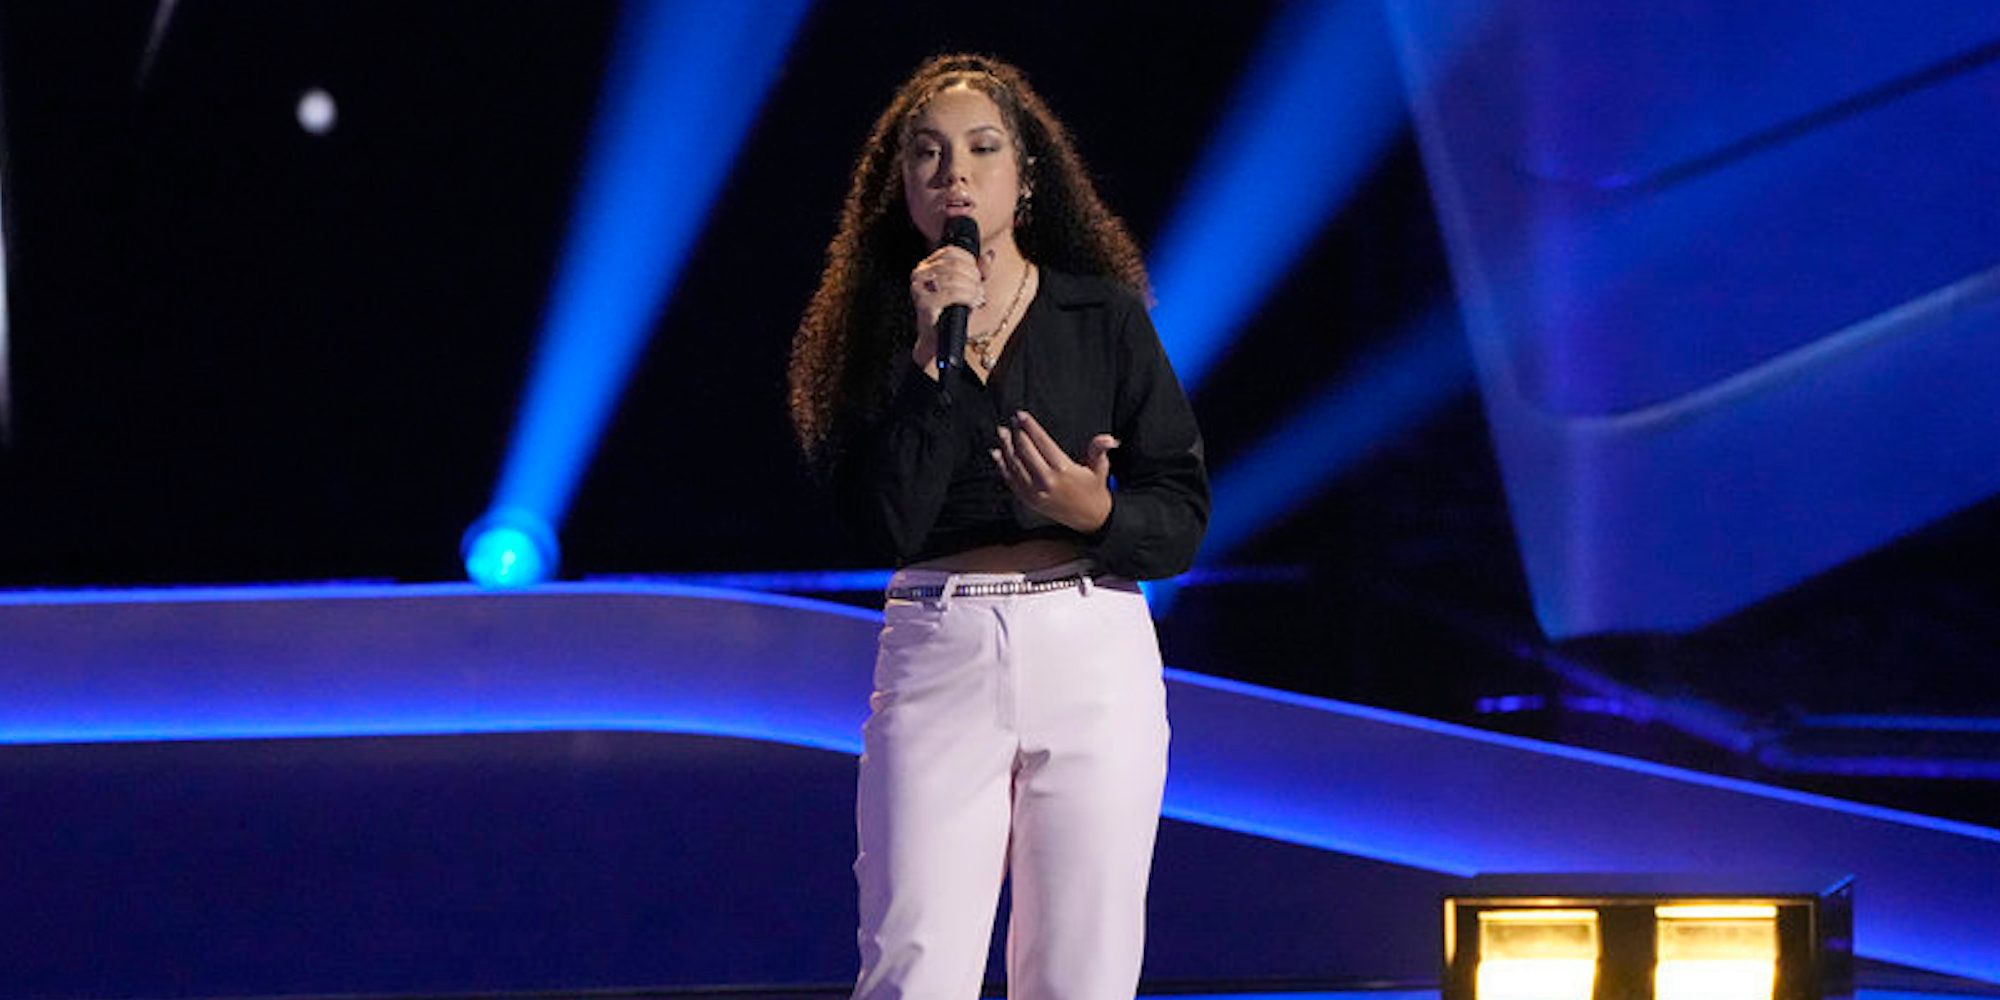 Serenity Arce auditions, singing into a mic, on 'The Voice'